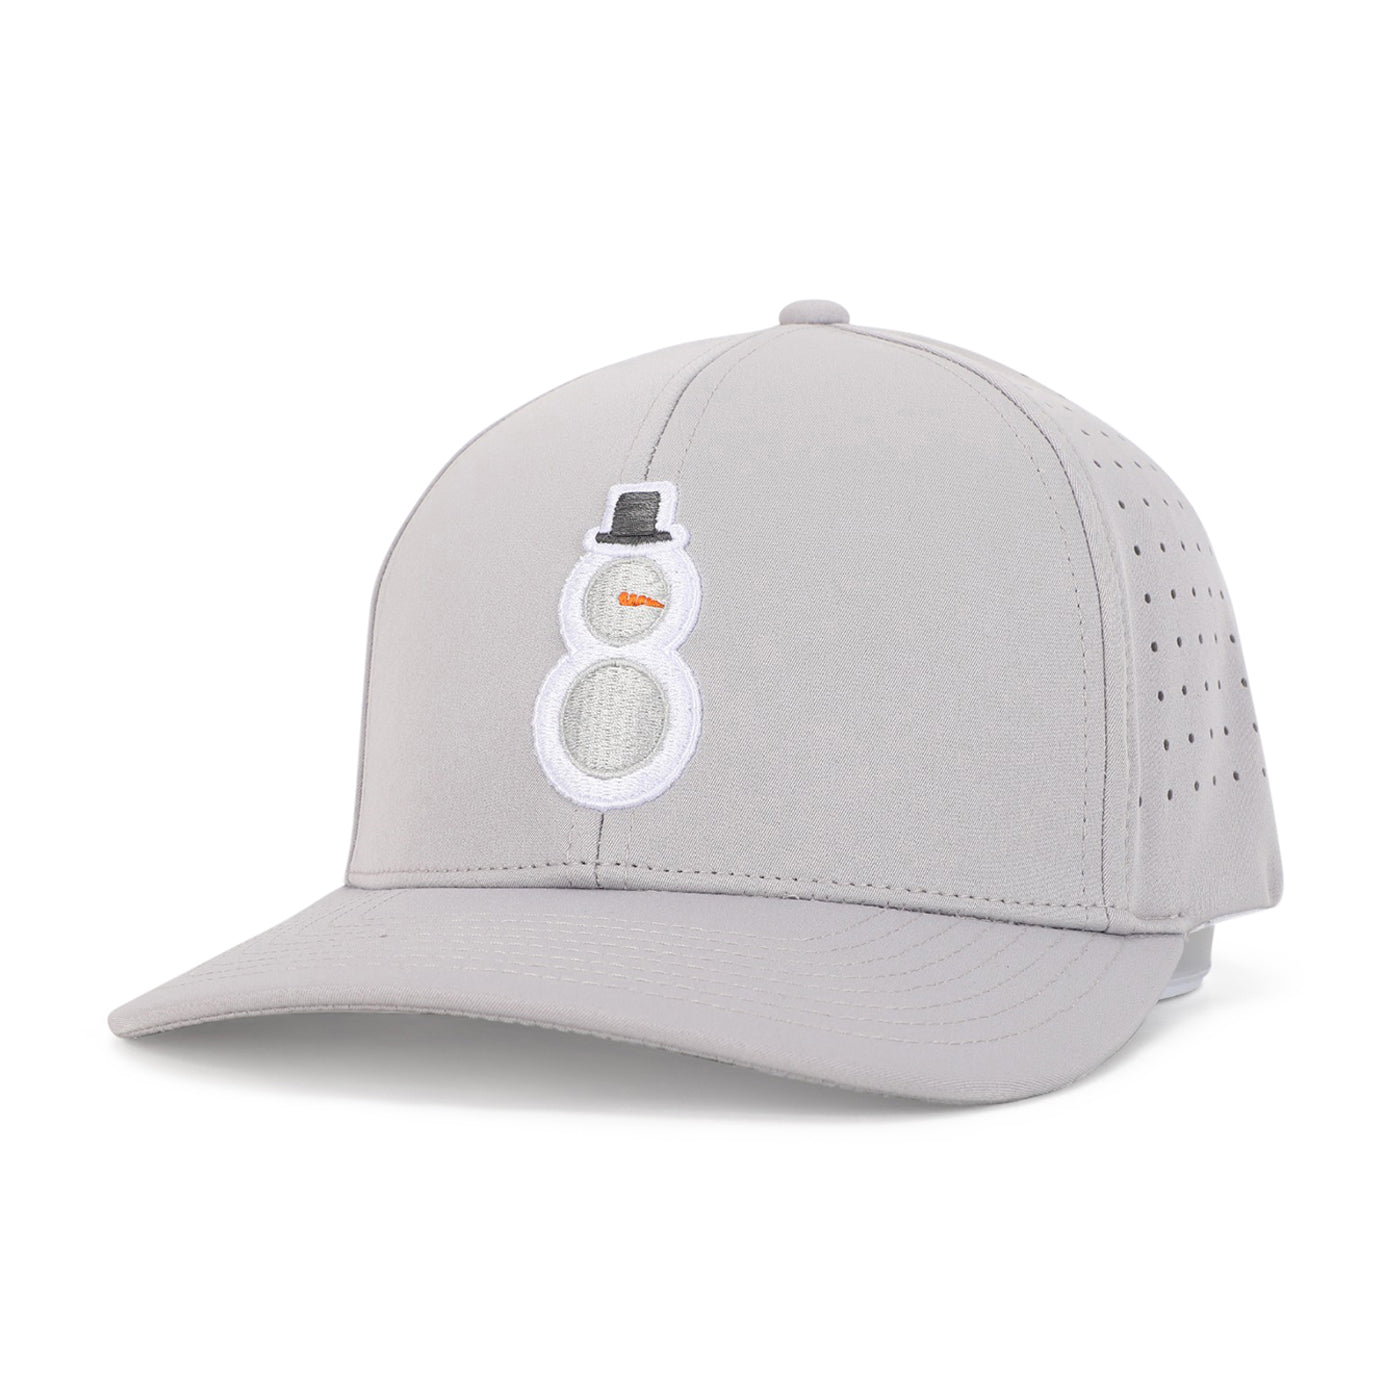 Snowman - Performance Golf Hat - Fitted